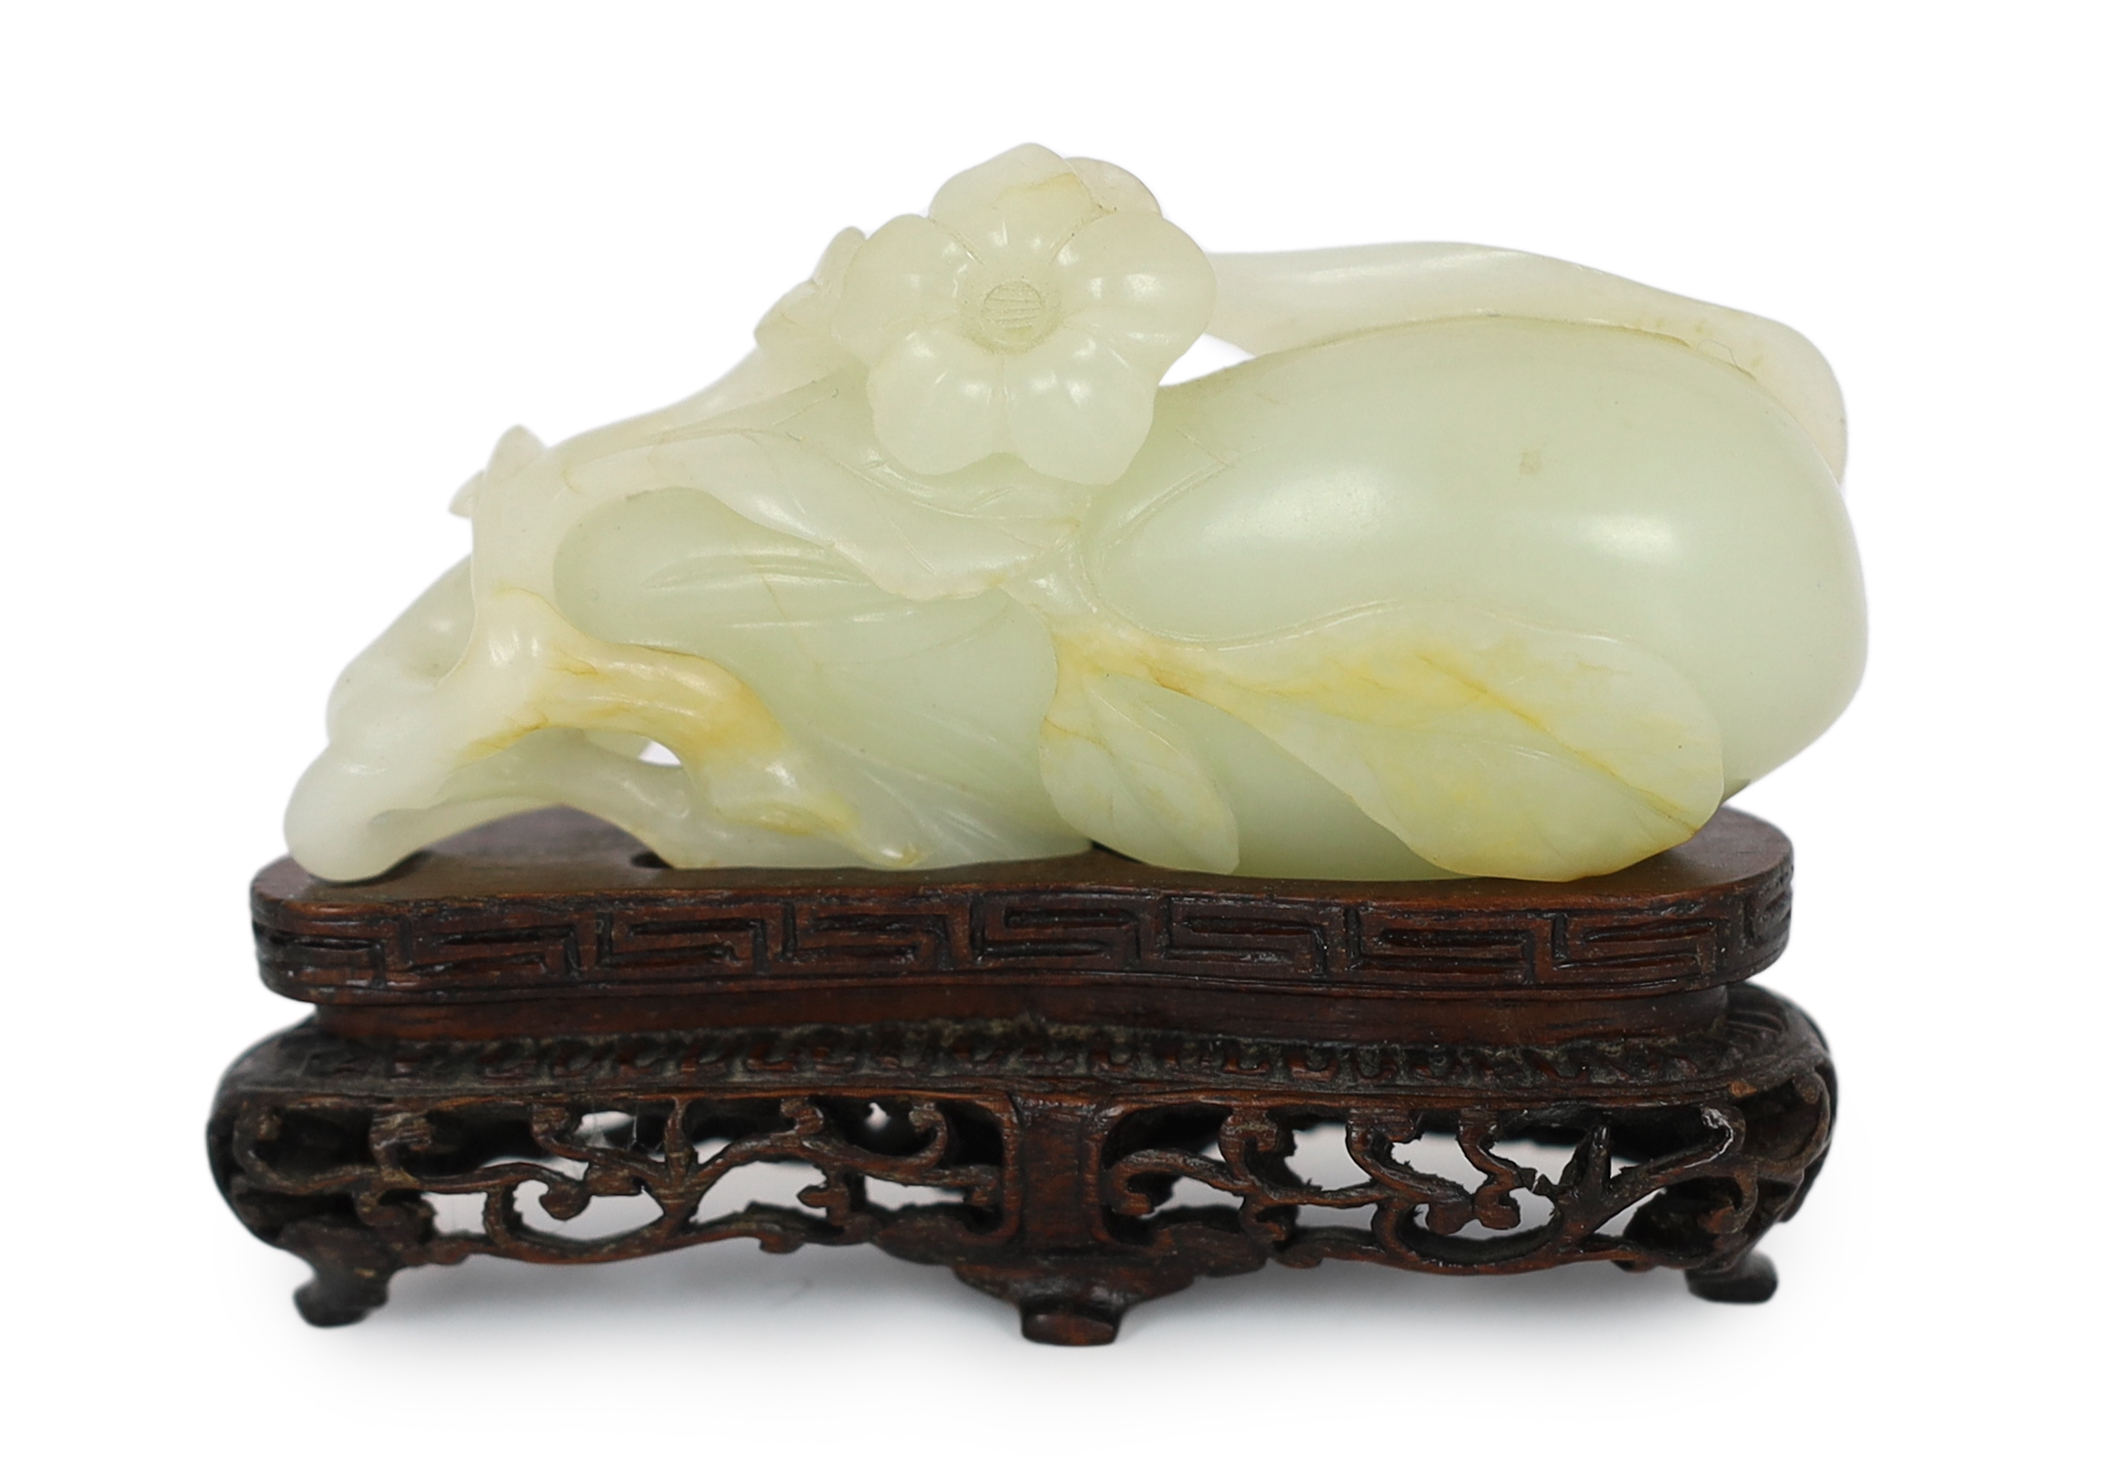 A Chinese pale celadon jade carving of a fruit, 18th century